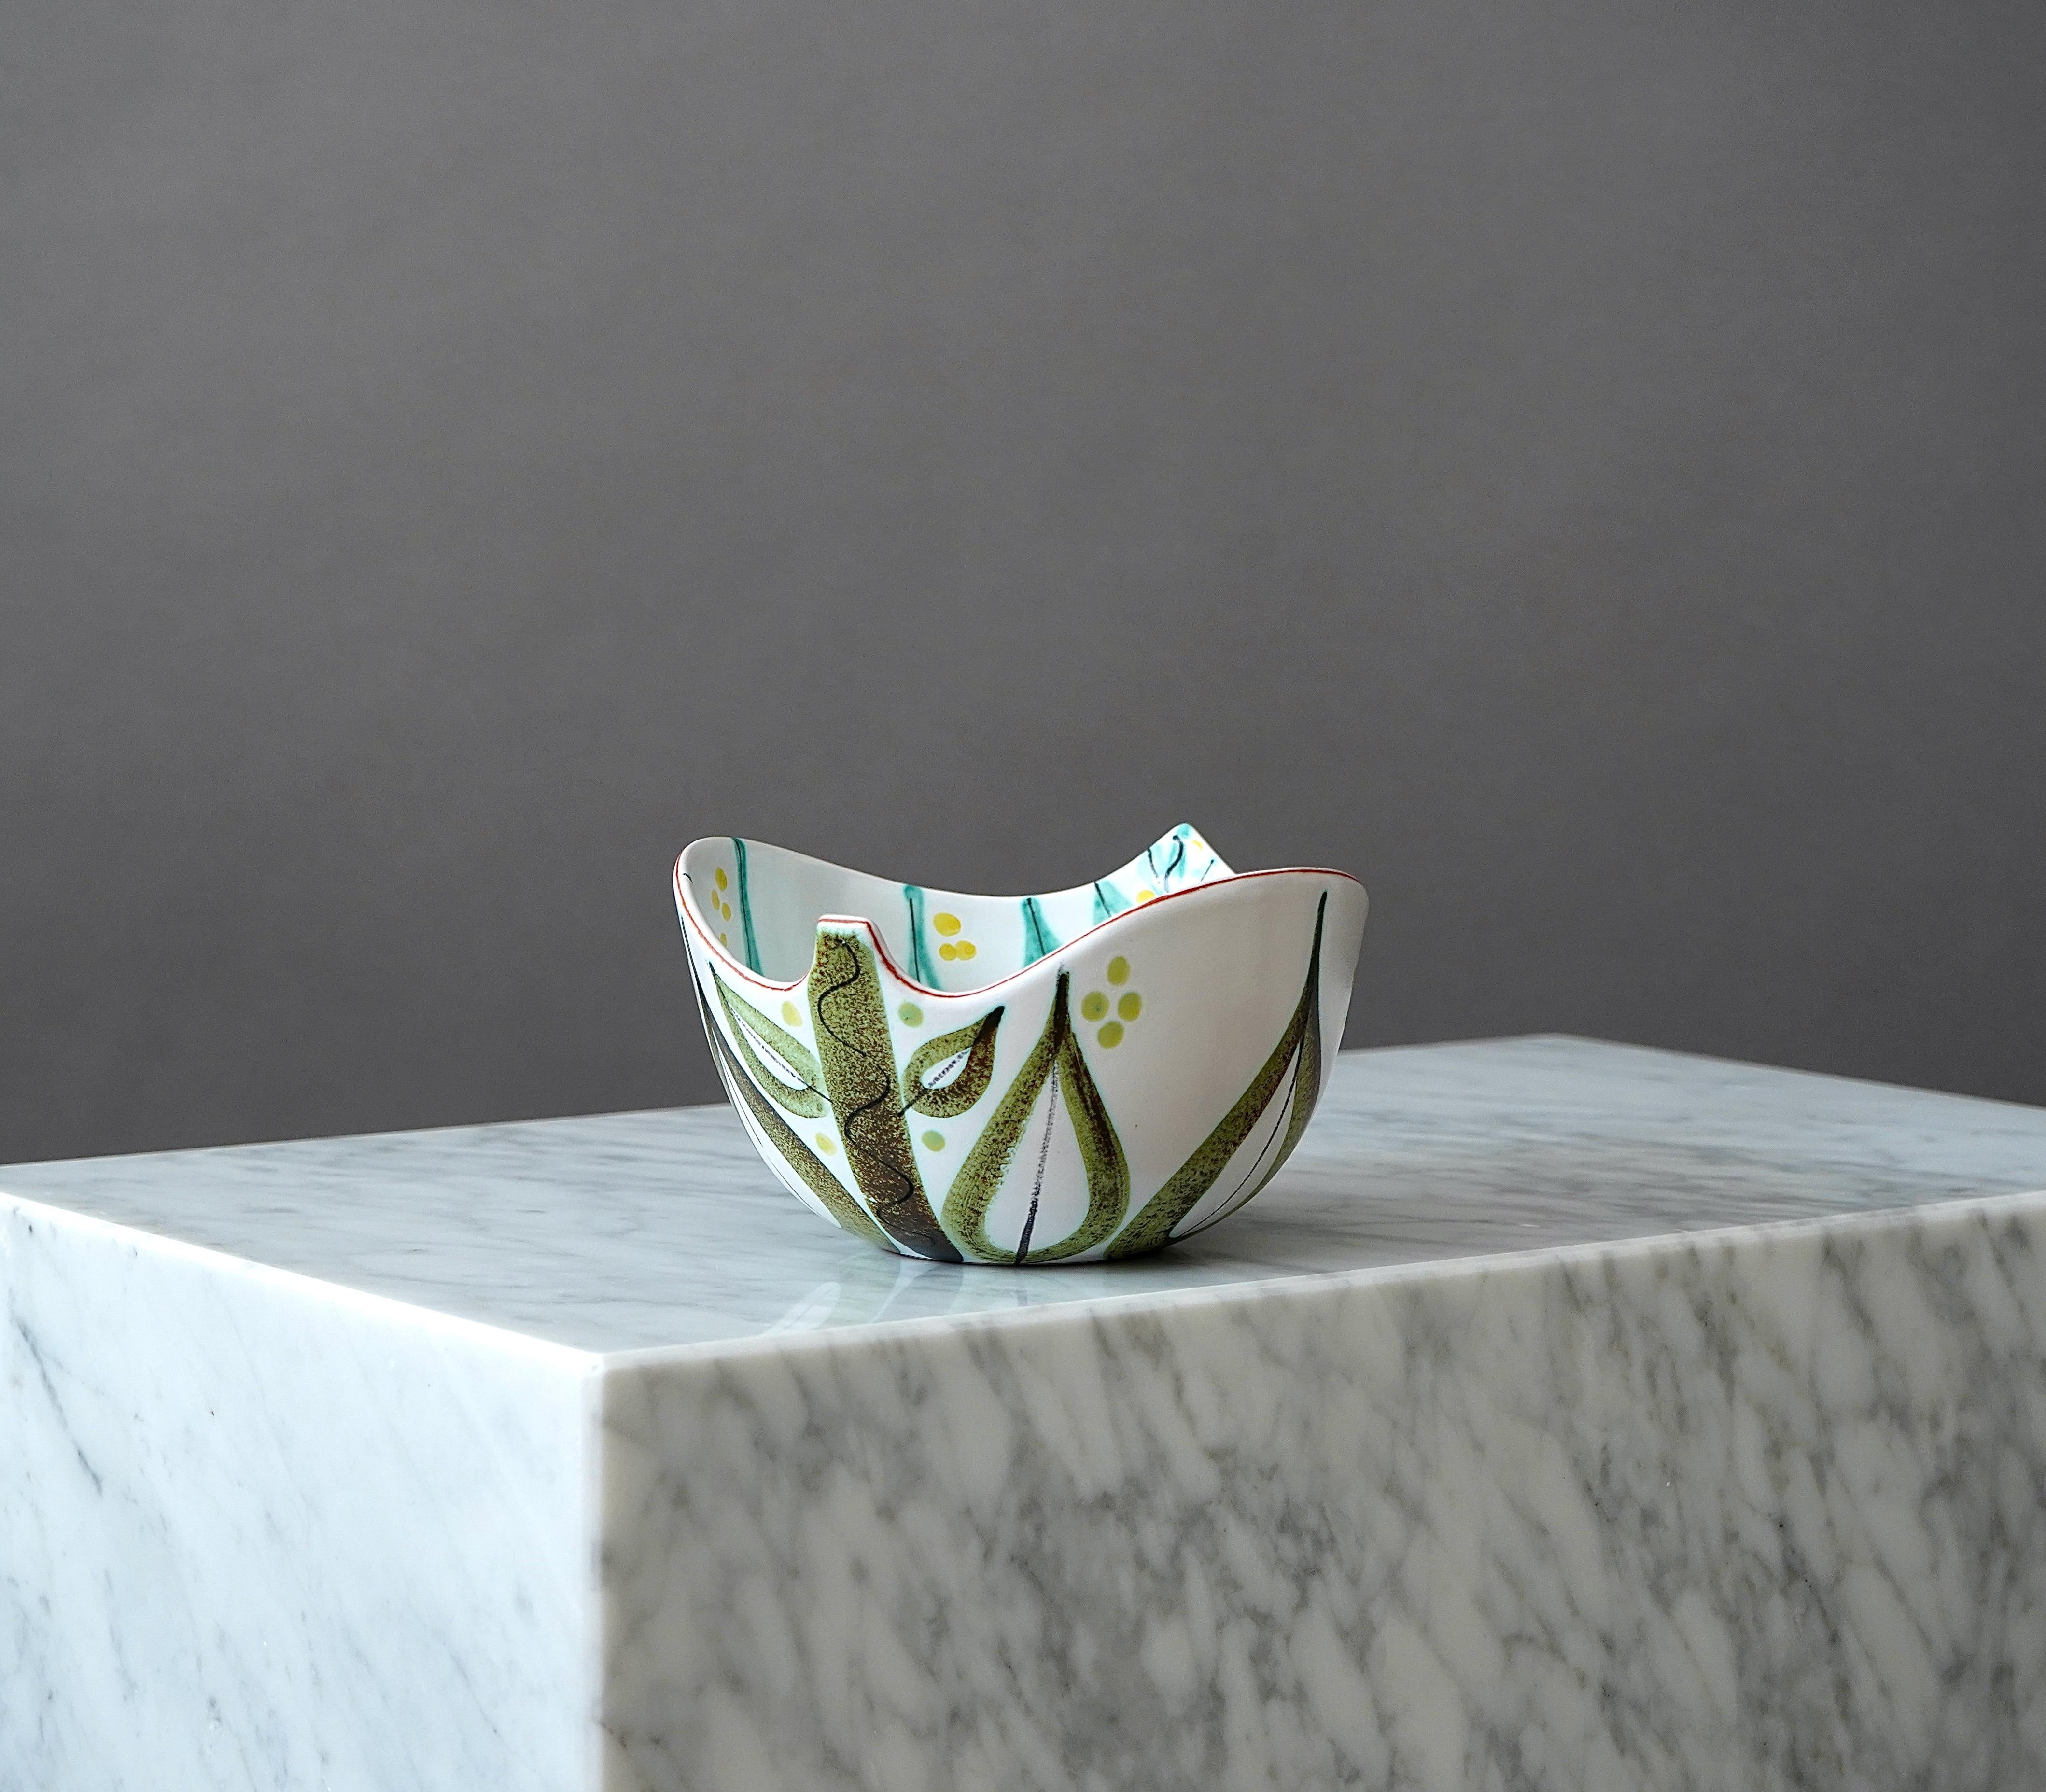 A beautiful faience bowl with amazing geometric pattern.
Designed by Stig Lindberg in Gustavsberg Studio, Sweden, 1950s.

Excellent condition.
Signed with the Gustavsberg studio hand.

Stig Lindberg and Gustavsberg’s artistic leader Wilhelm Kåge